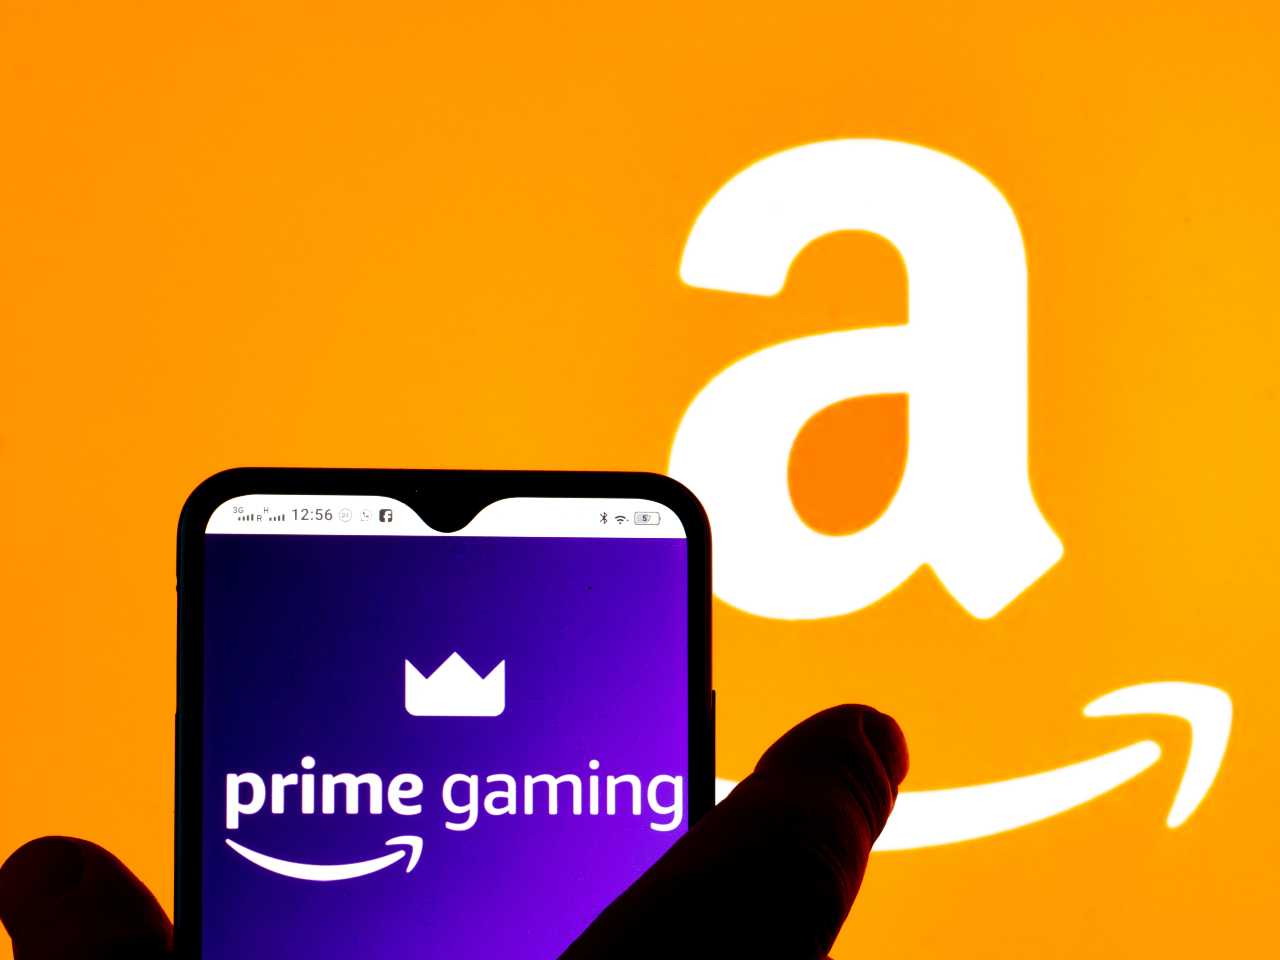 Amazon Prime Gaming - Androiditaly.com 20220930